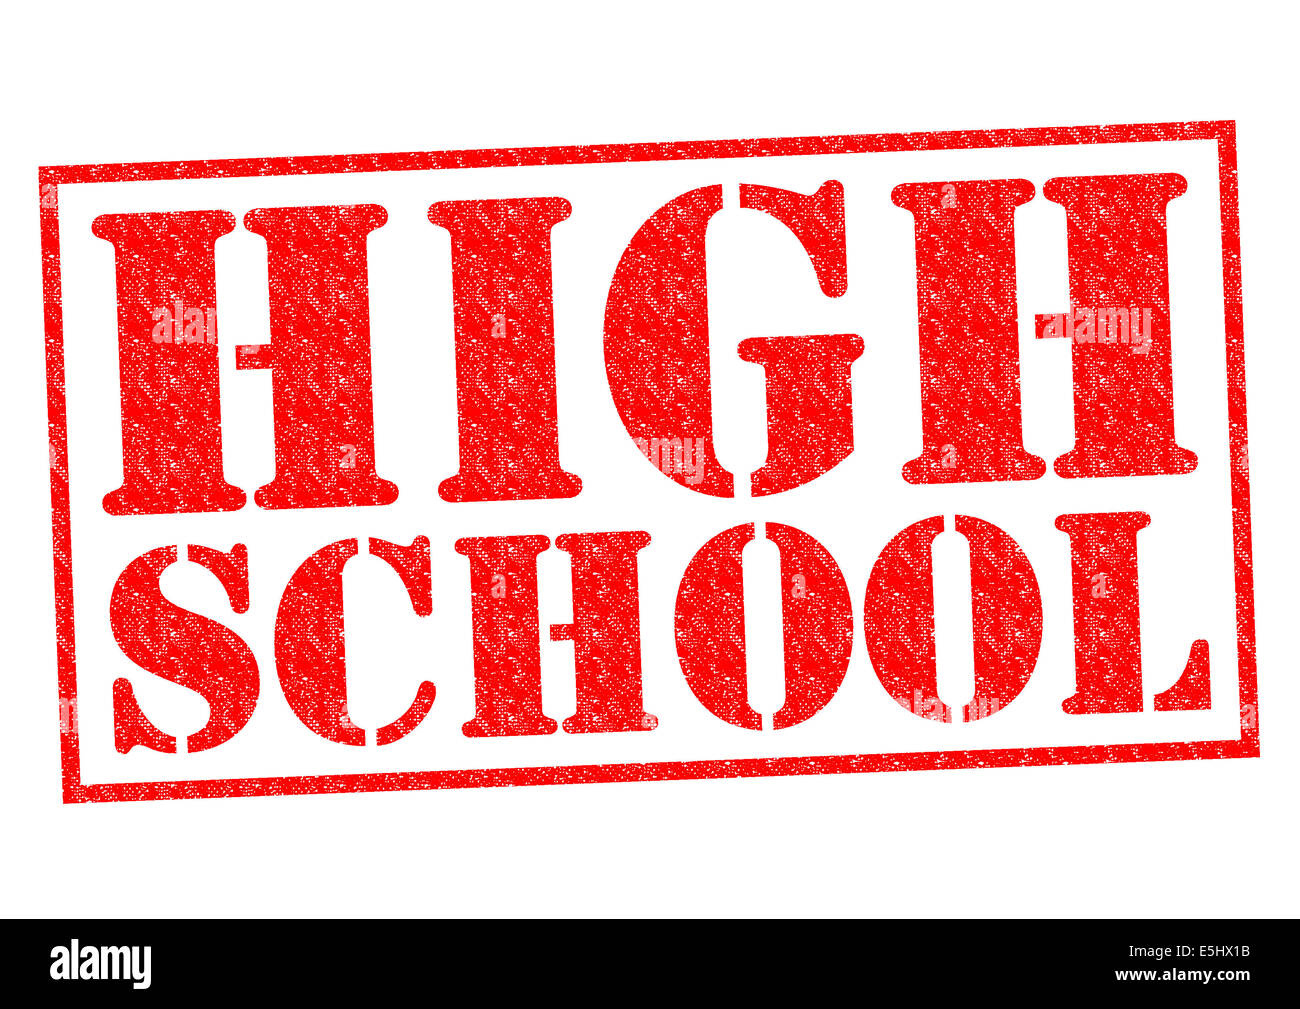 HIGH SCHOOL red Rubber Stamp over a white background. Stock Photo